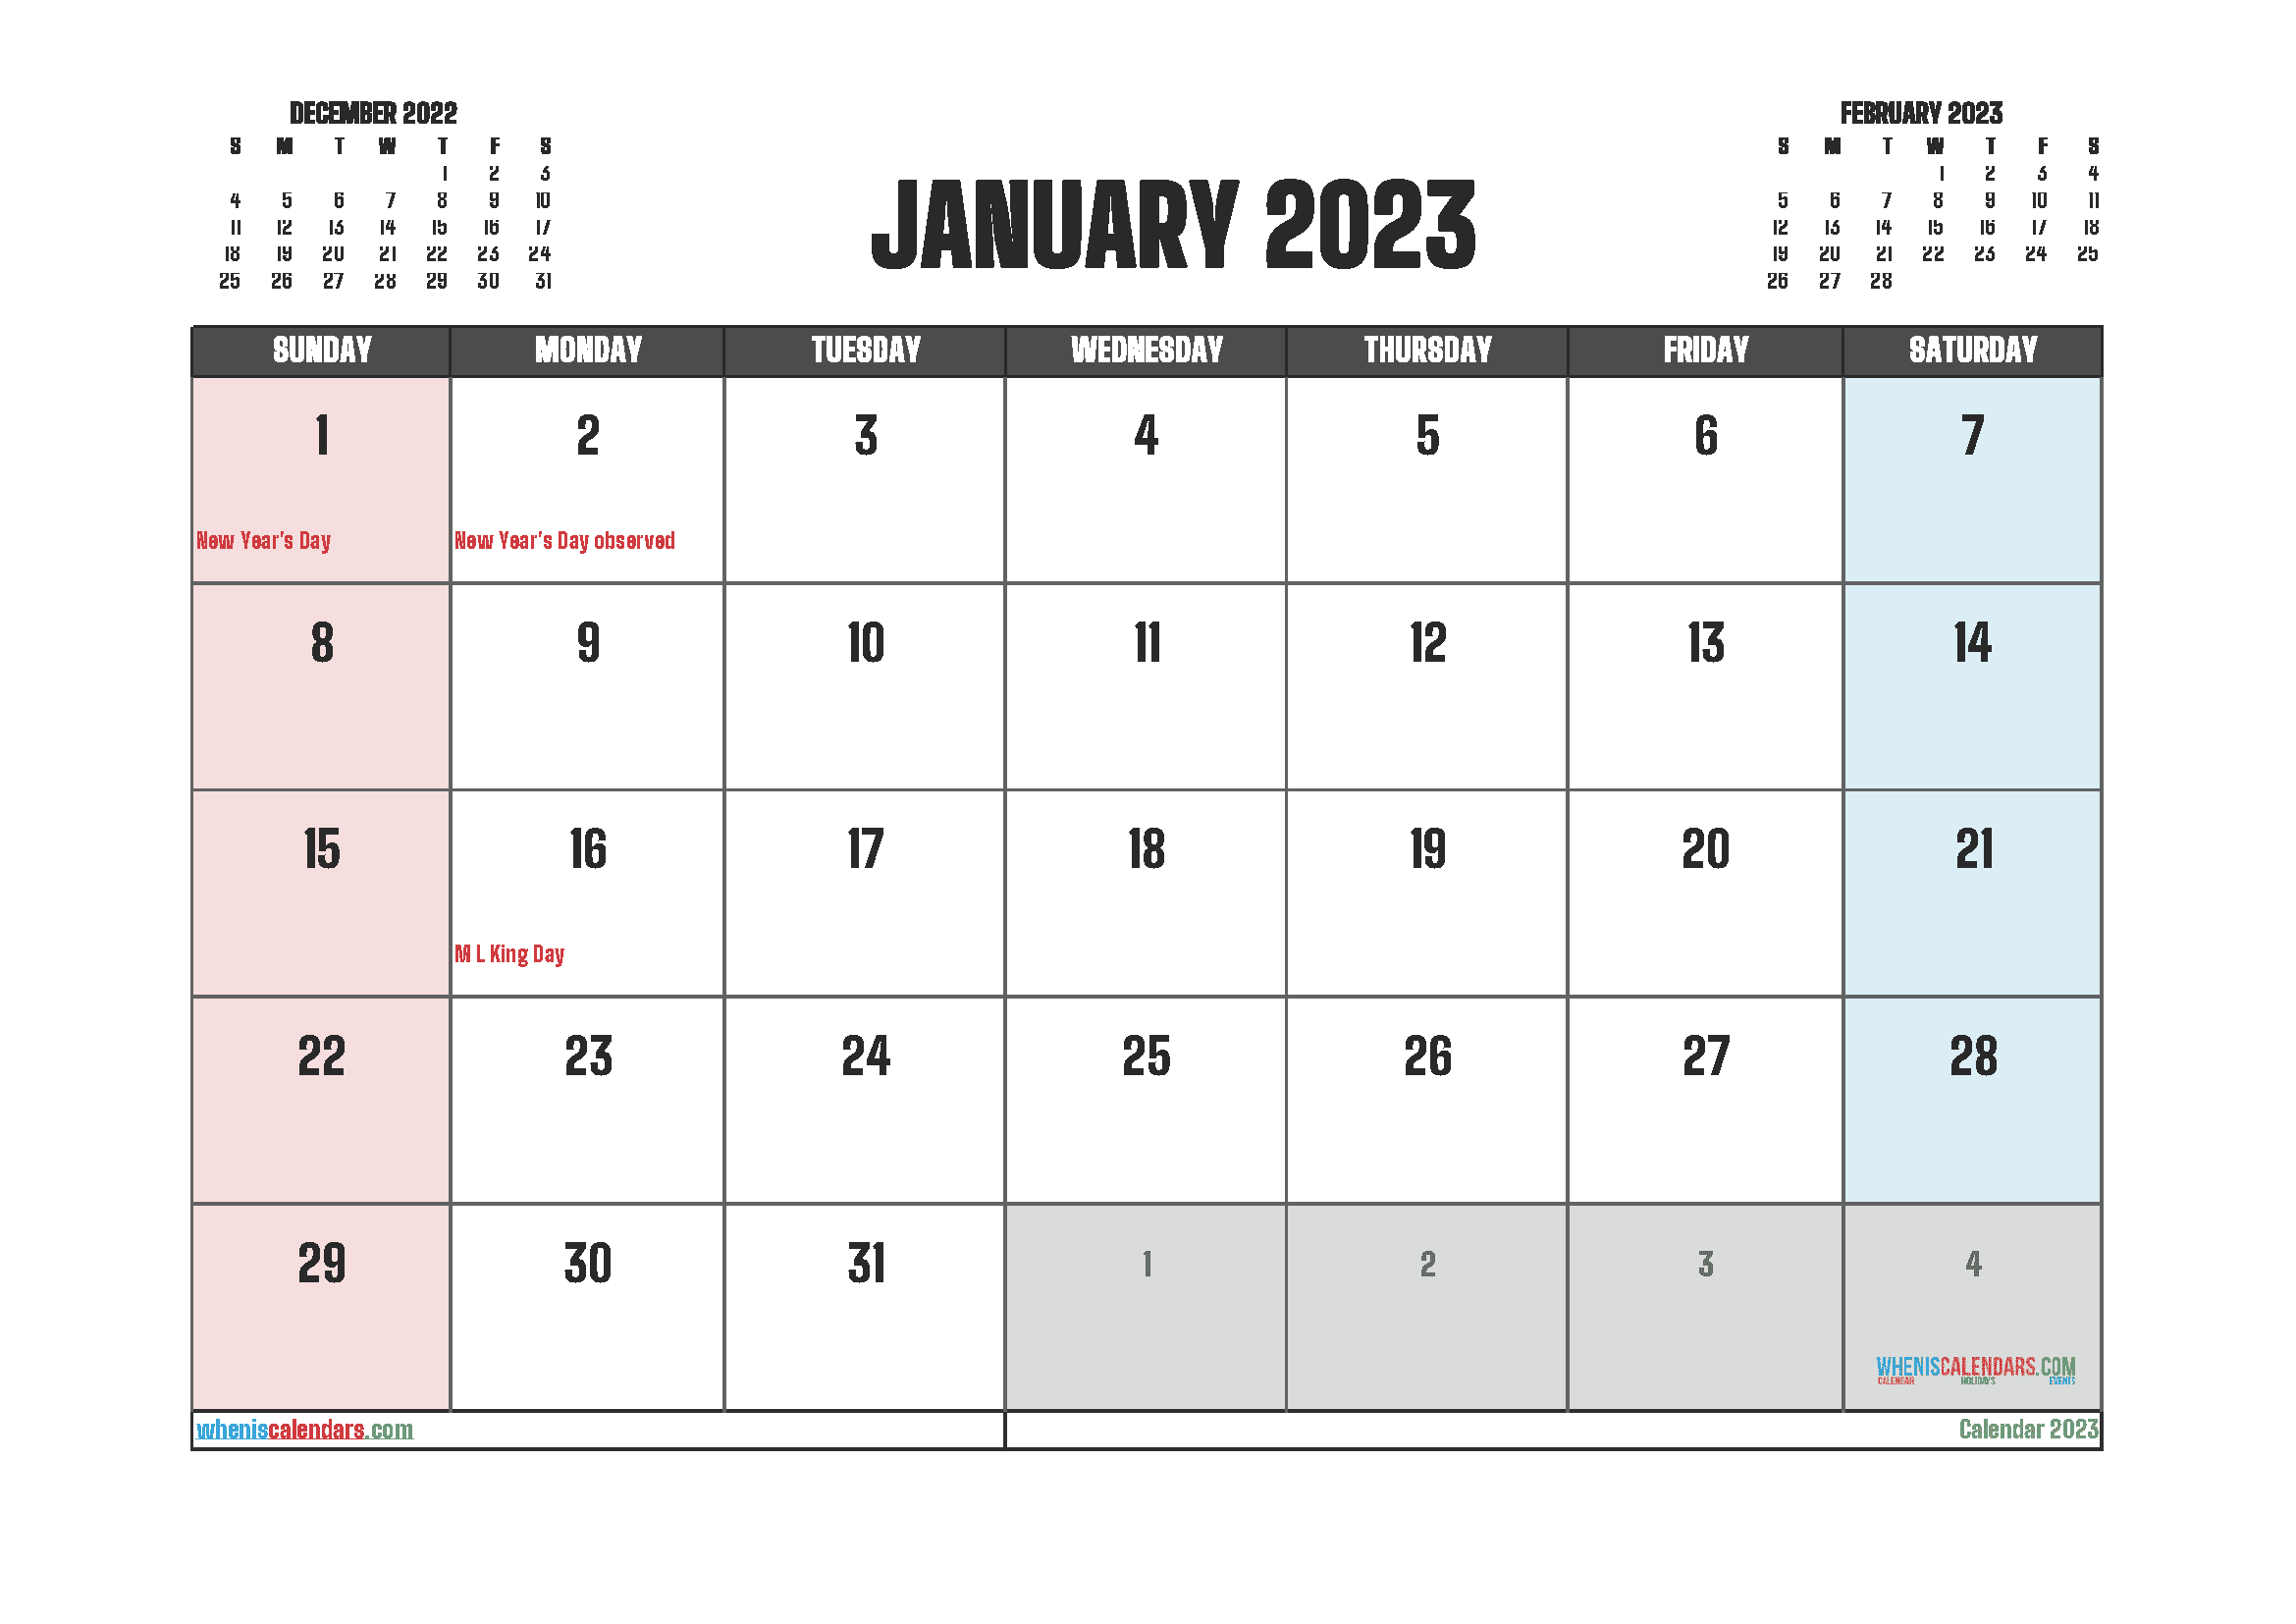 Free Printable Calendar January 2023 with Holidays PDF in Landscape